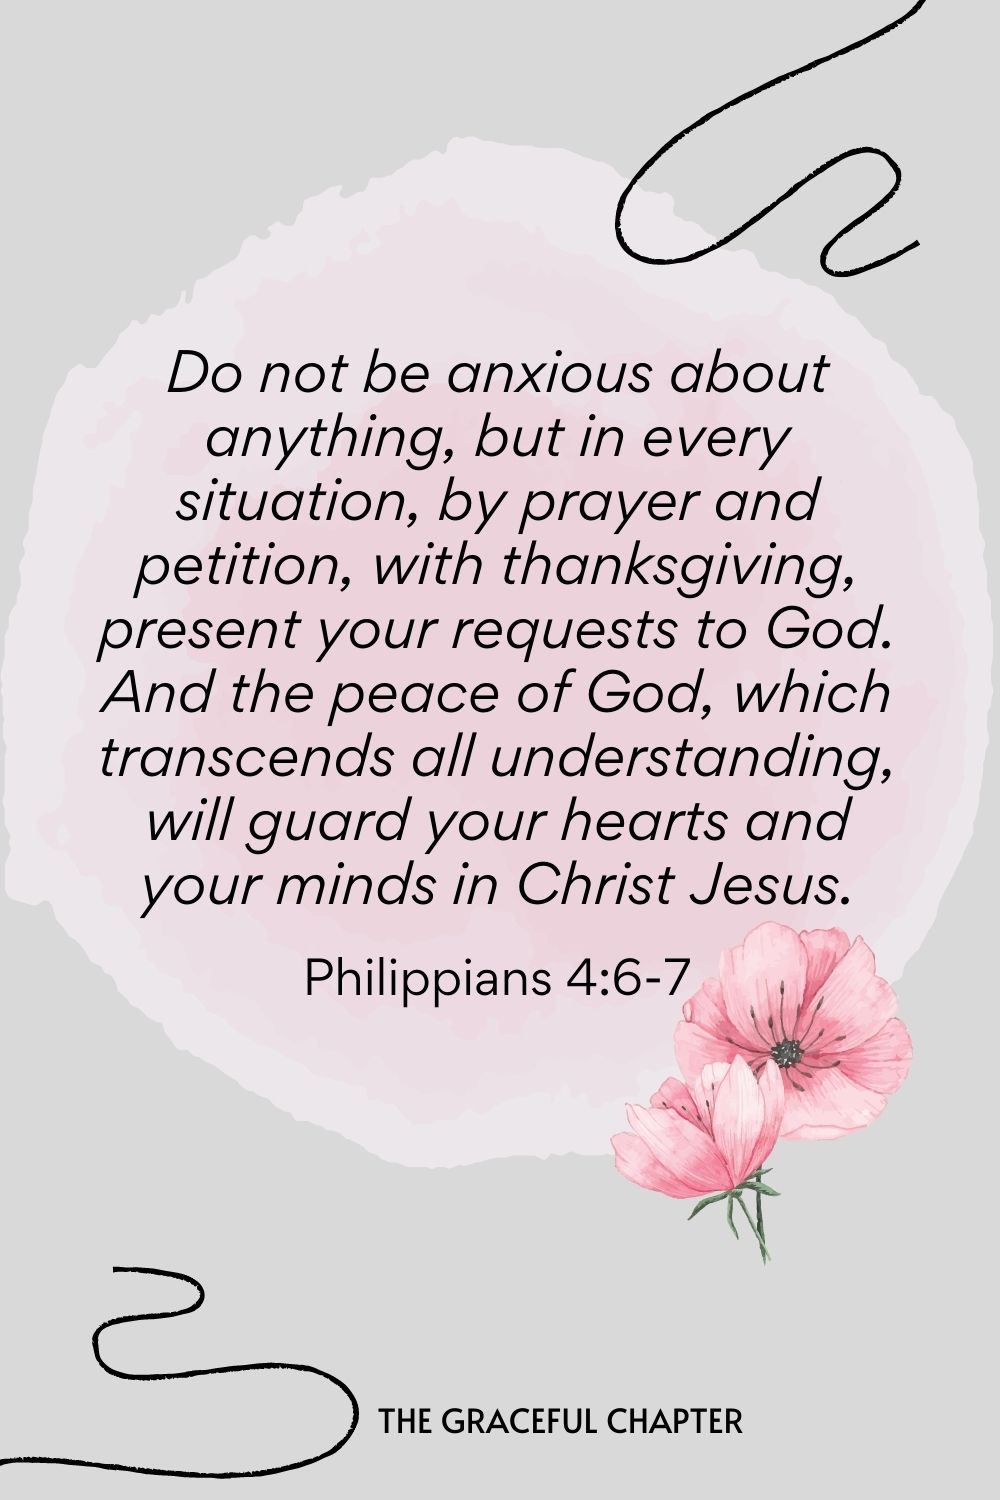 Do not be anxious about anything, but in every situation, by prayer and petition, with thanksgiving, present your requests to God. And the peace of God, which transcends all understanding, will guard your hearts and your minds in Christ Jesus.  Philippians 4:6-7